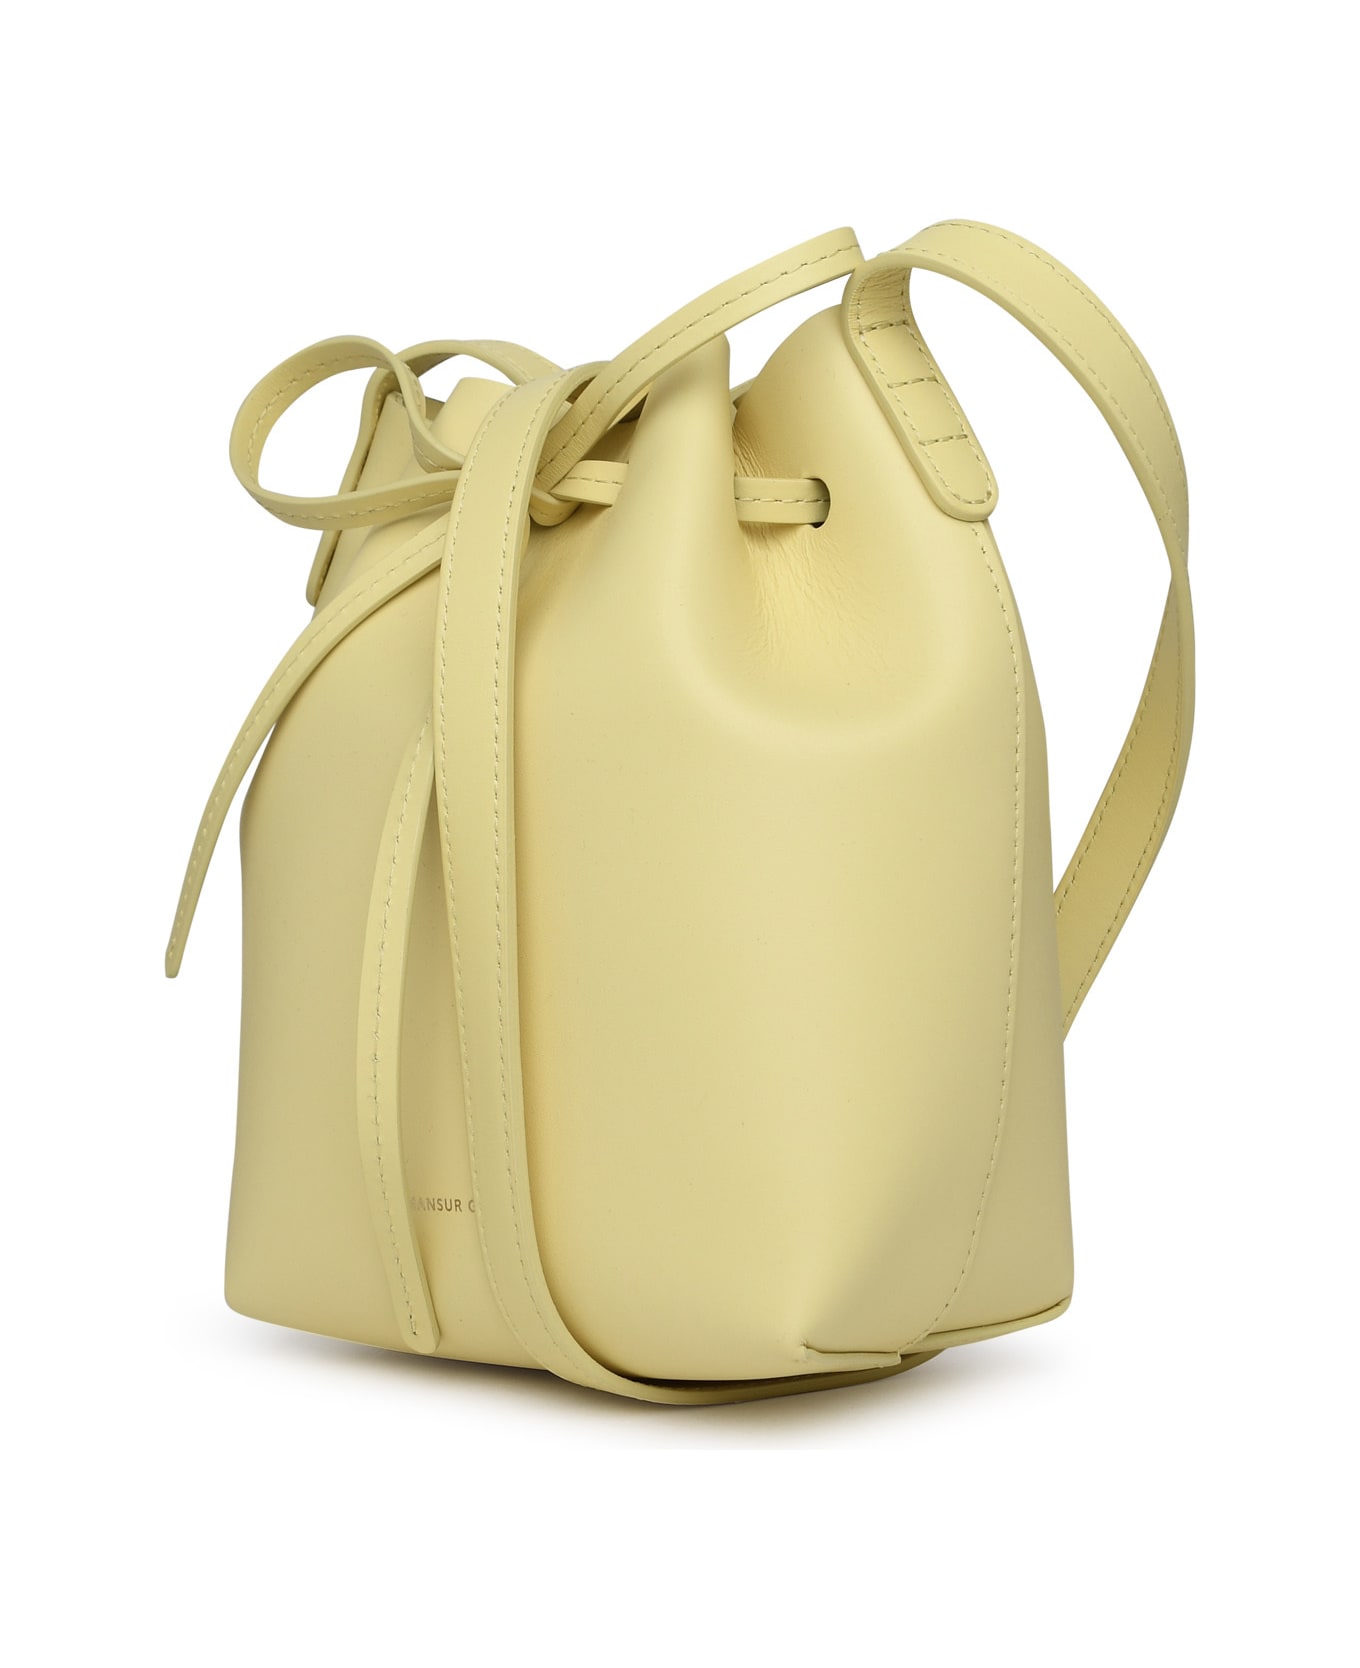 Mansur Gavriel Small Bucket Bag In Yellow Leather - Yellow